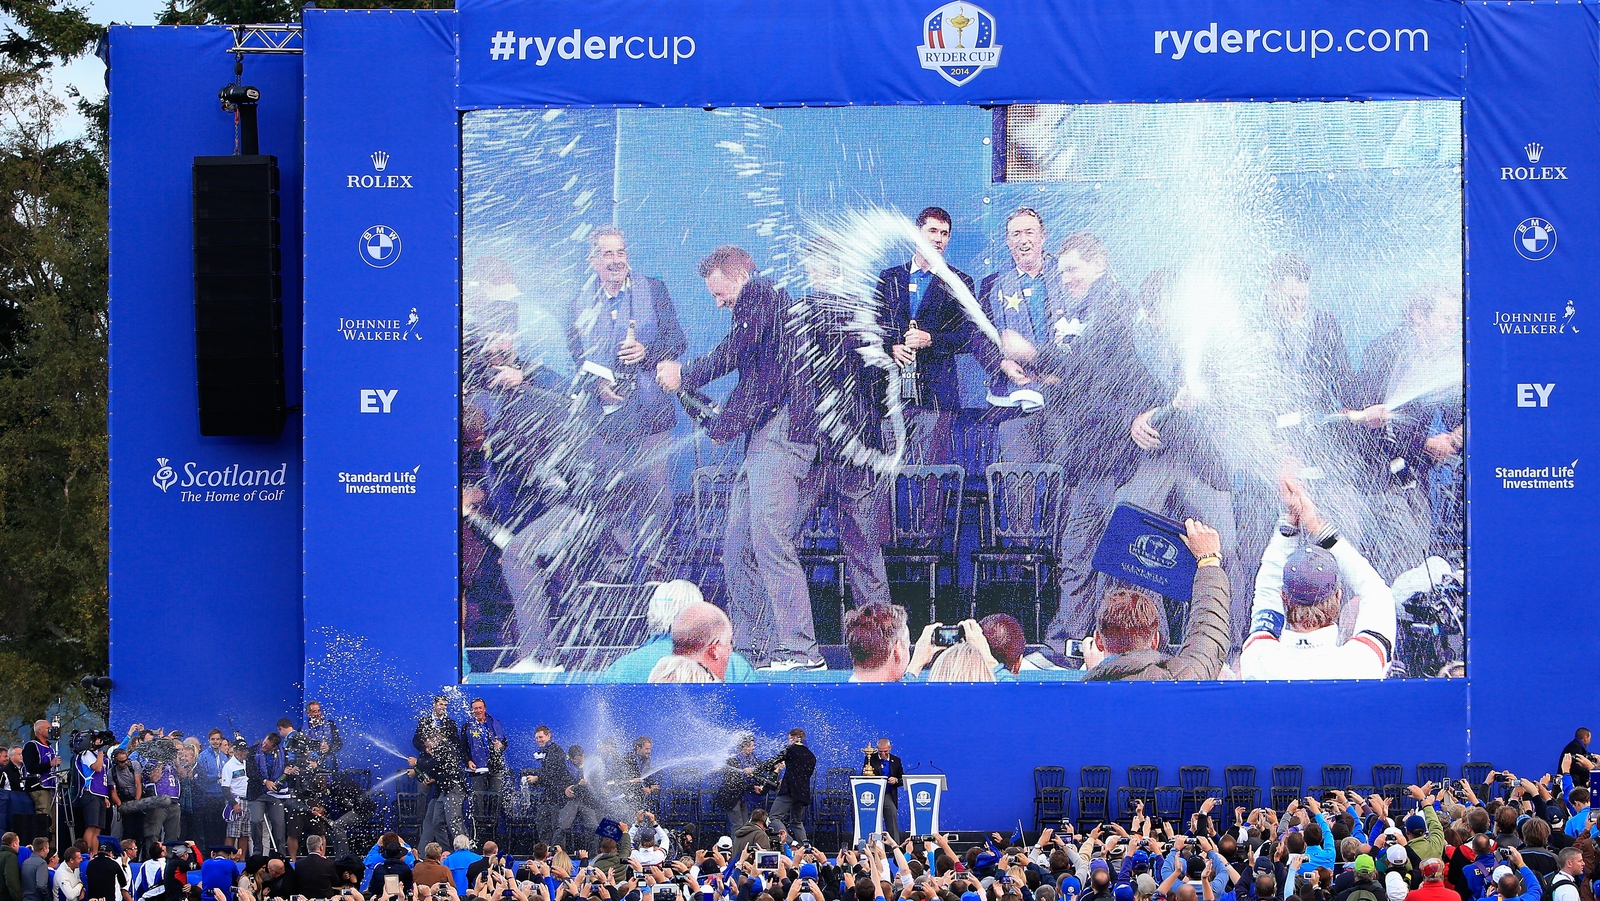 Image - Paul McGinley drenched in champagne following his successful 2014 captaincy